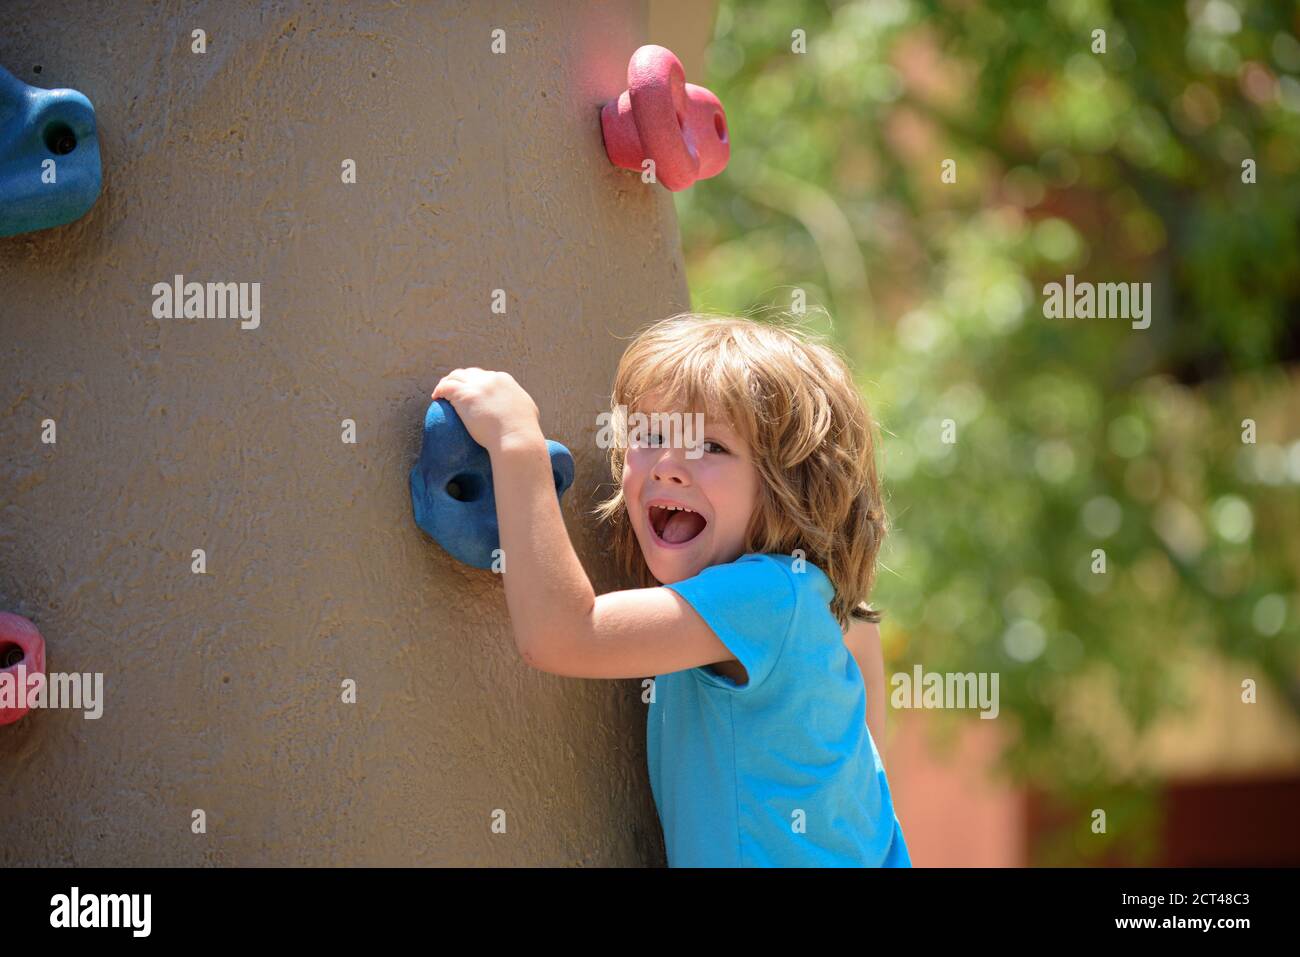 Insurance kids. Portrait of kid boy climbing on practical wall indoor, bouldering training. Health care insurance concept for family and children Stock Photo